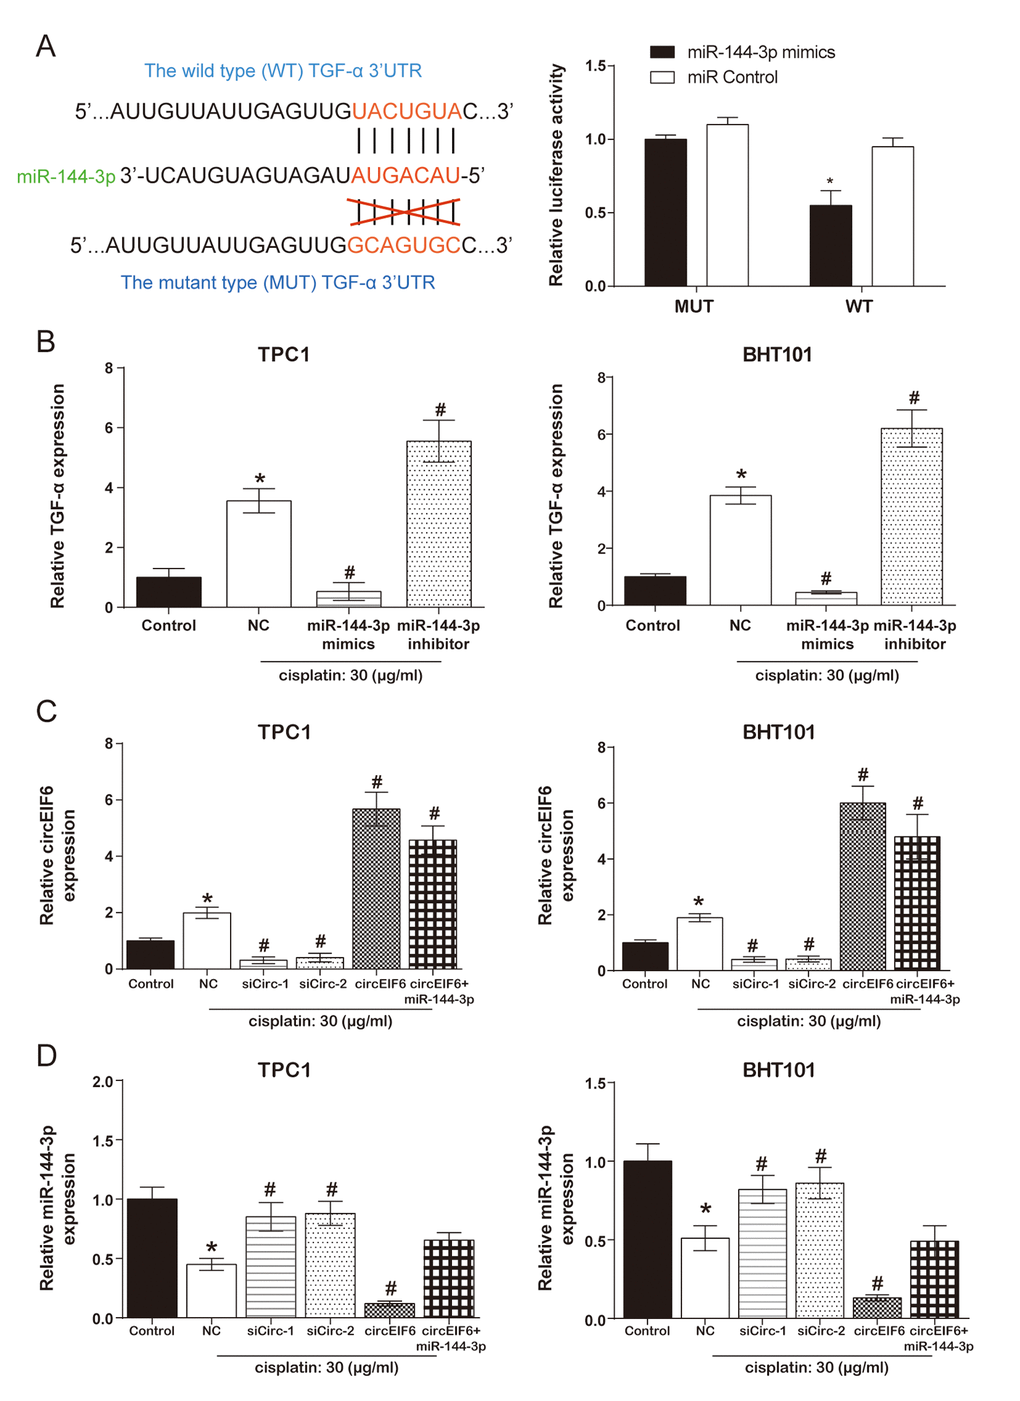 CircEIF6 regulated TGF-α through targeting miR-144-3p in the TPC1 and BHT101 cells with cisplatin treatment. (A) The target binding site between miR-144-3p and TGF-α was revealed and dual luciferase reporter gene assays was used to verify the target relationship between TGF-α and miR-144-3p (Right). *P B) TGF-α mRNA in the TPC1 and BHT101 cells with or without cisplatin treatment was measured after altering miR-144-3p expression and miR-144-3p had an inhibition role on TGF-α under cisplatin treatment. *P #P C) Transfection efficiency was identified after regulating circEIF6 expression in the TPC1 and BHT101 cells with or without cisplatin treatment. *P #P *P #P 